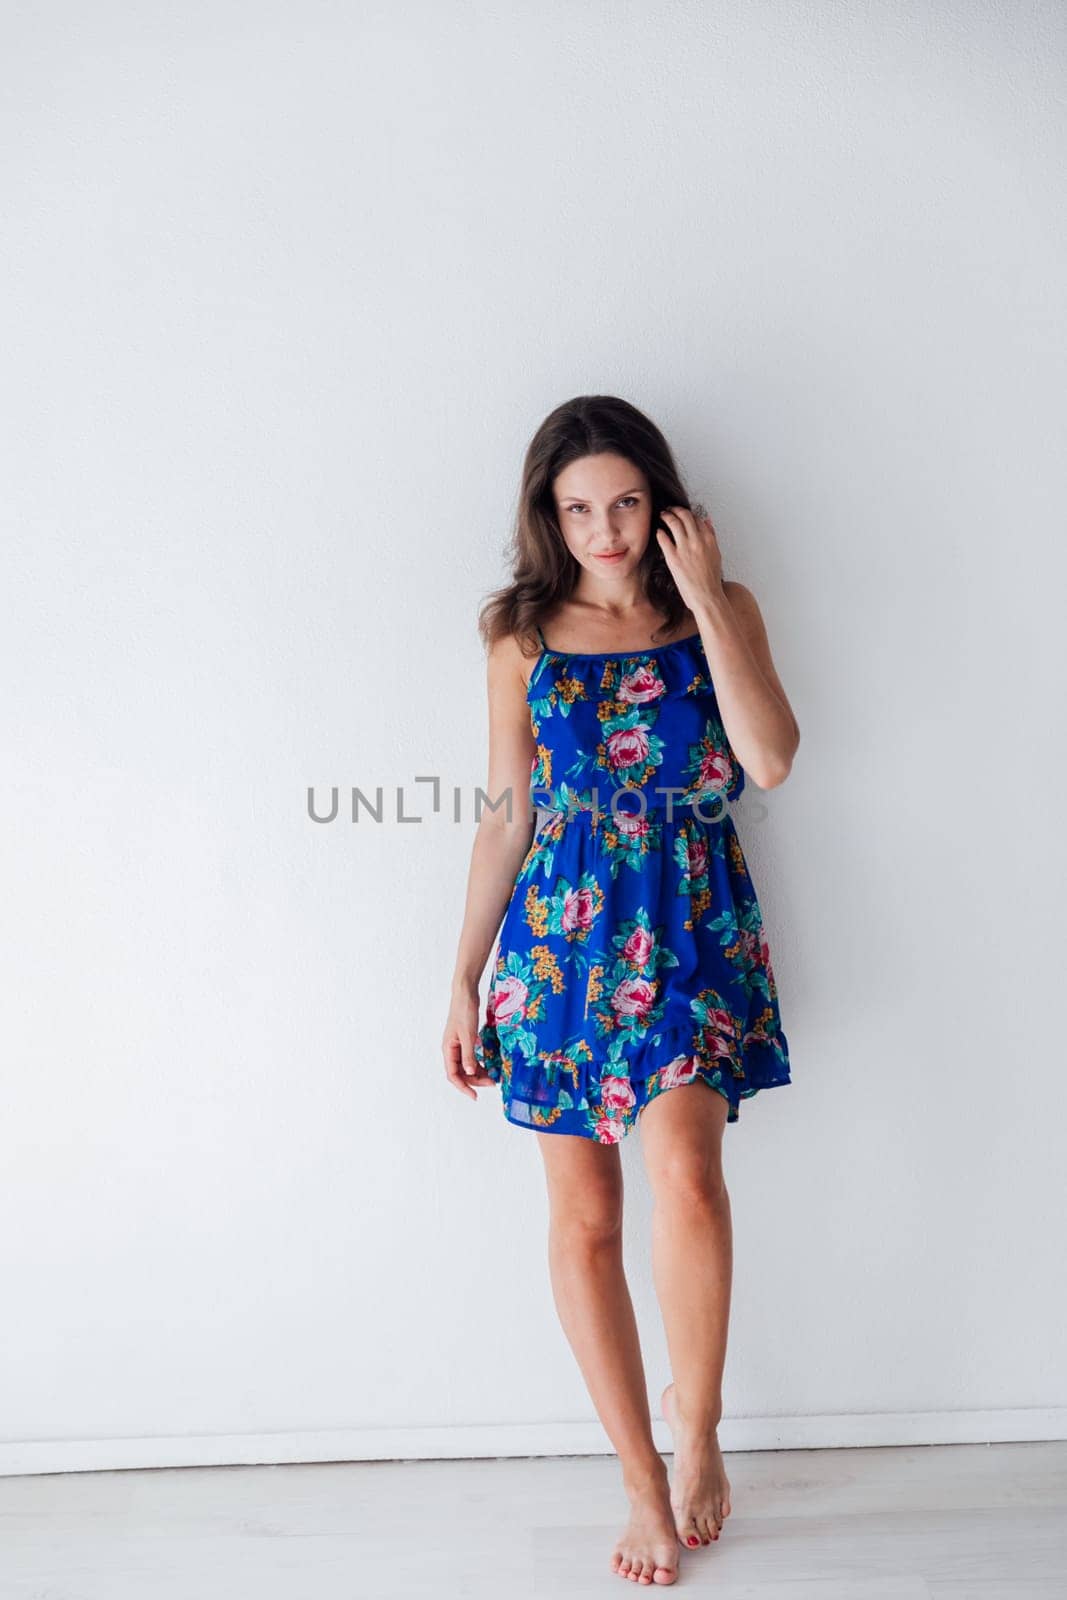 brunette woman in a blue floral dress against a white wall by Simakov